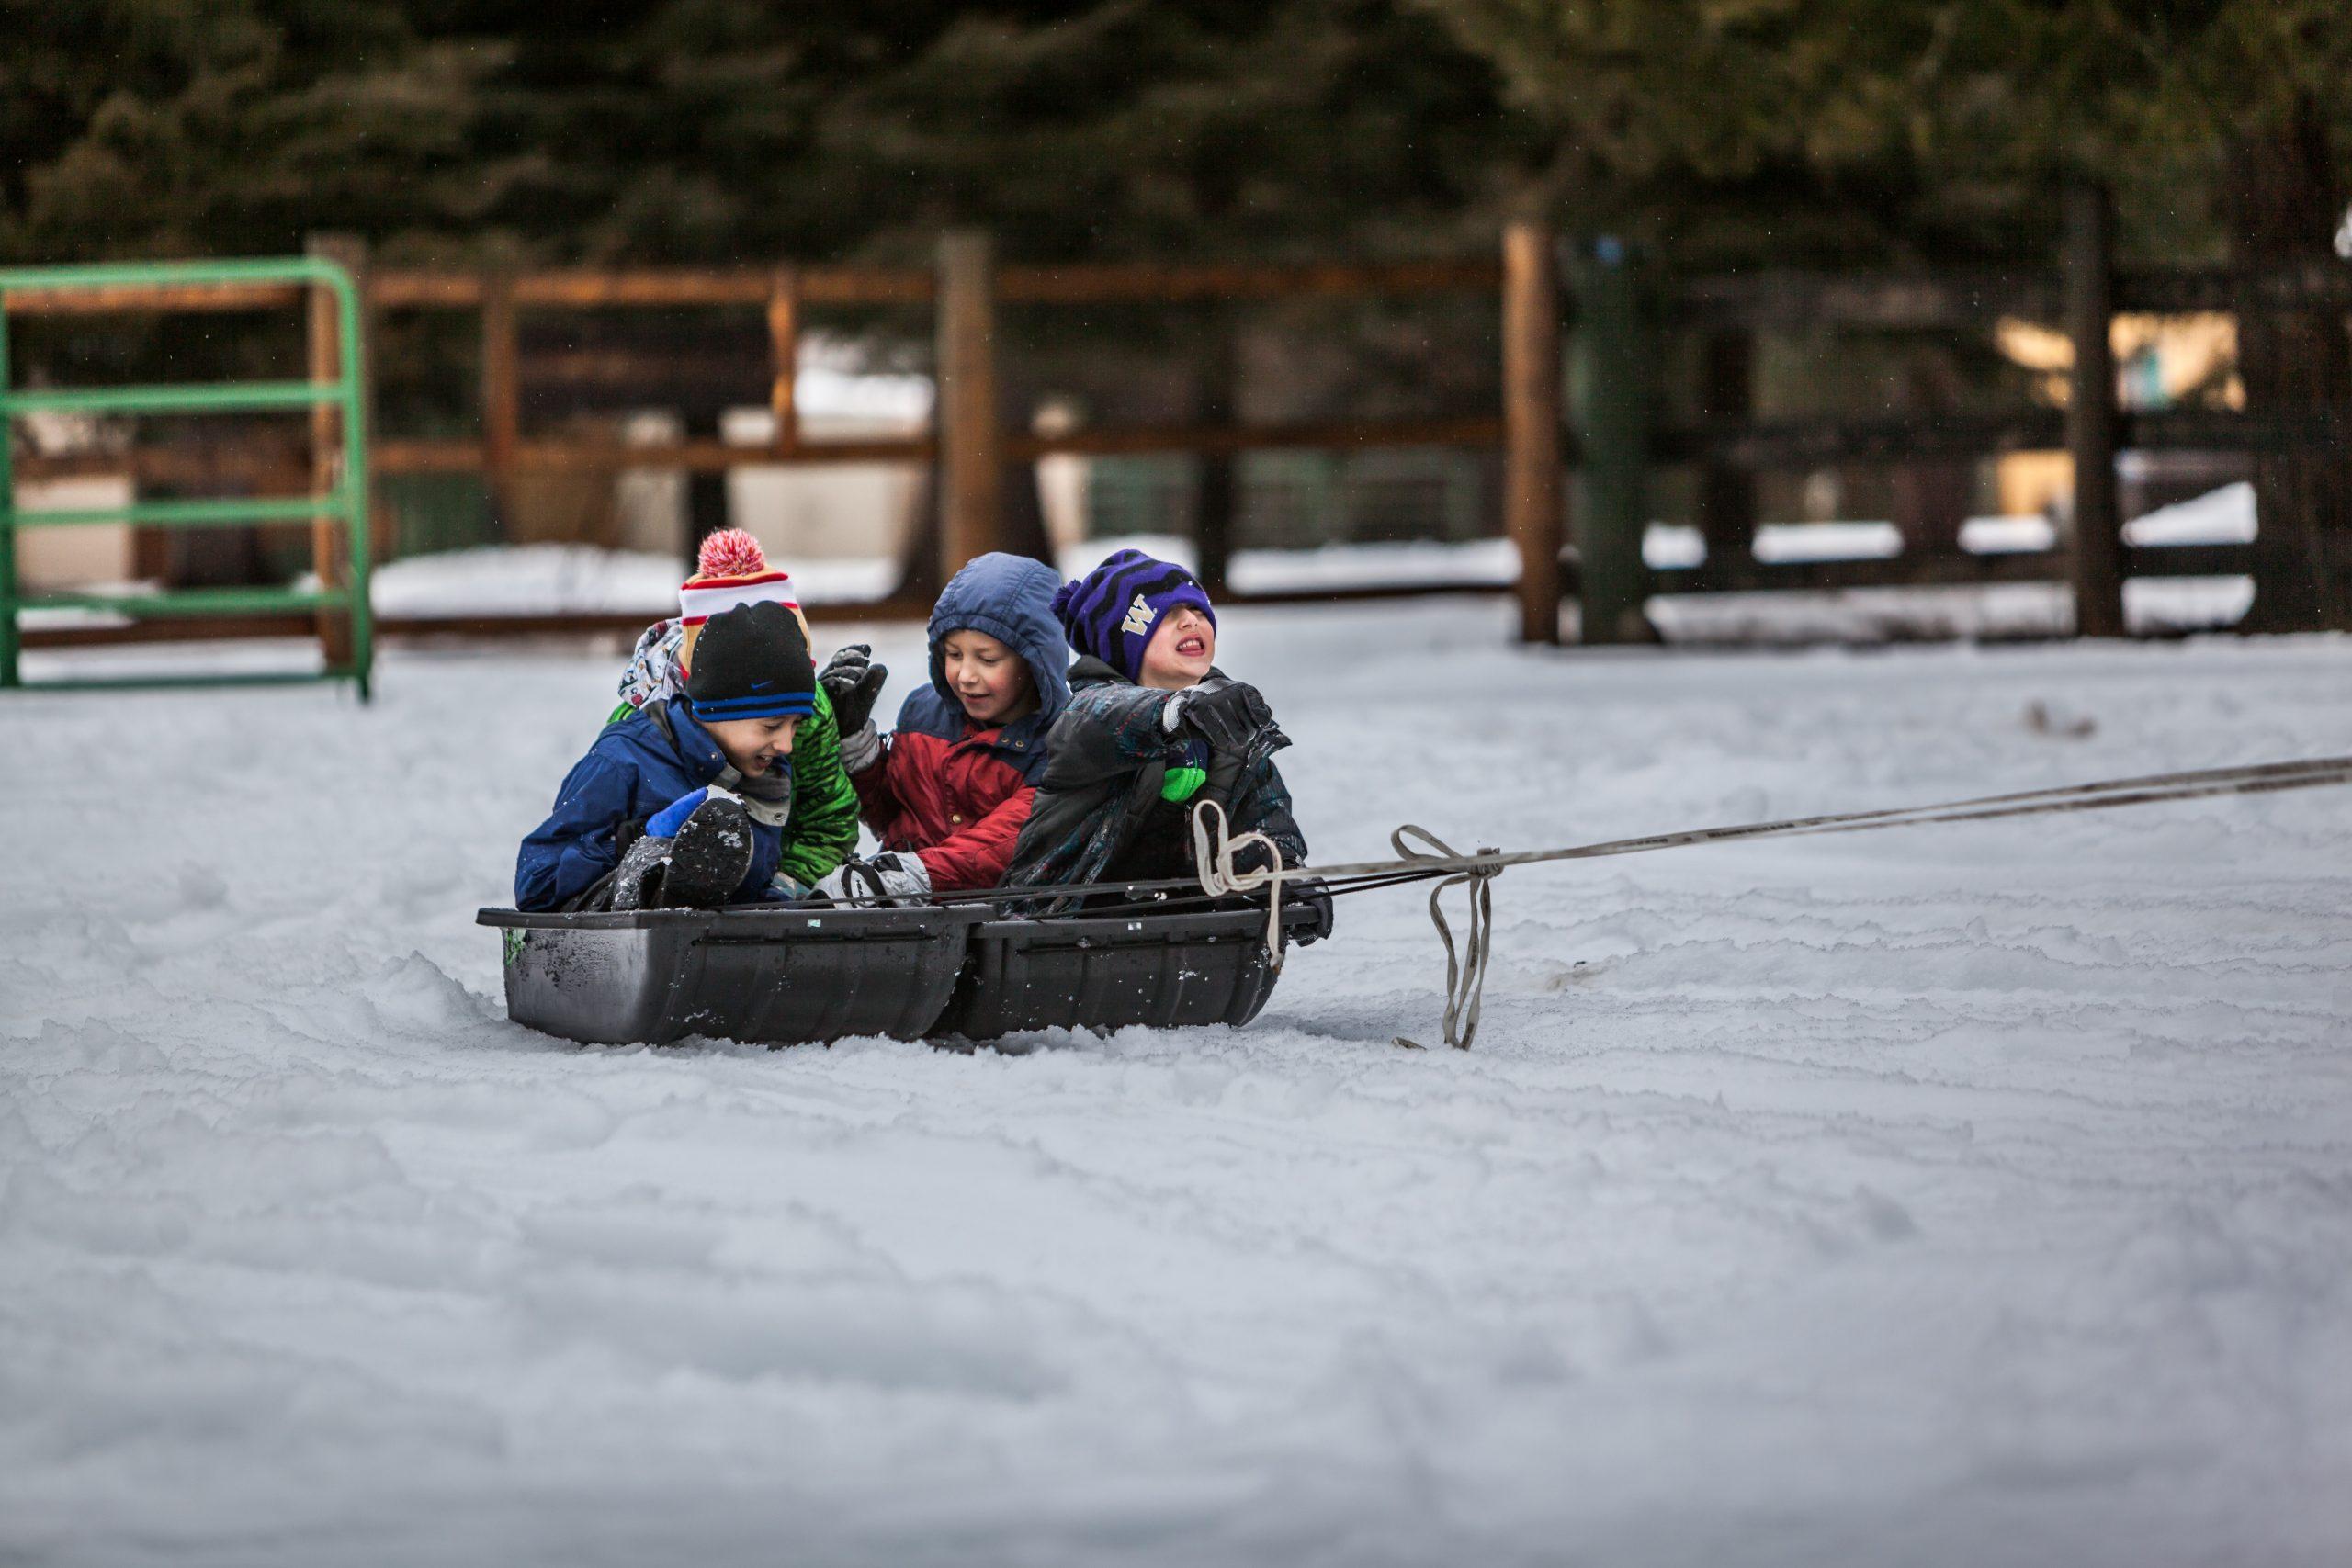 winter time fun with family cabin-inspired activities 